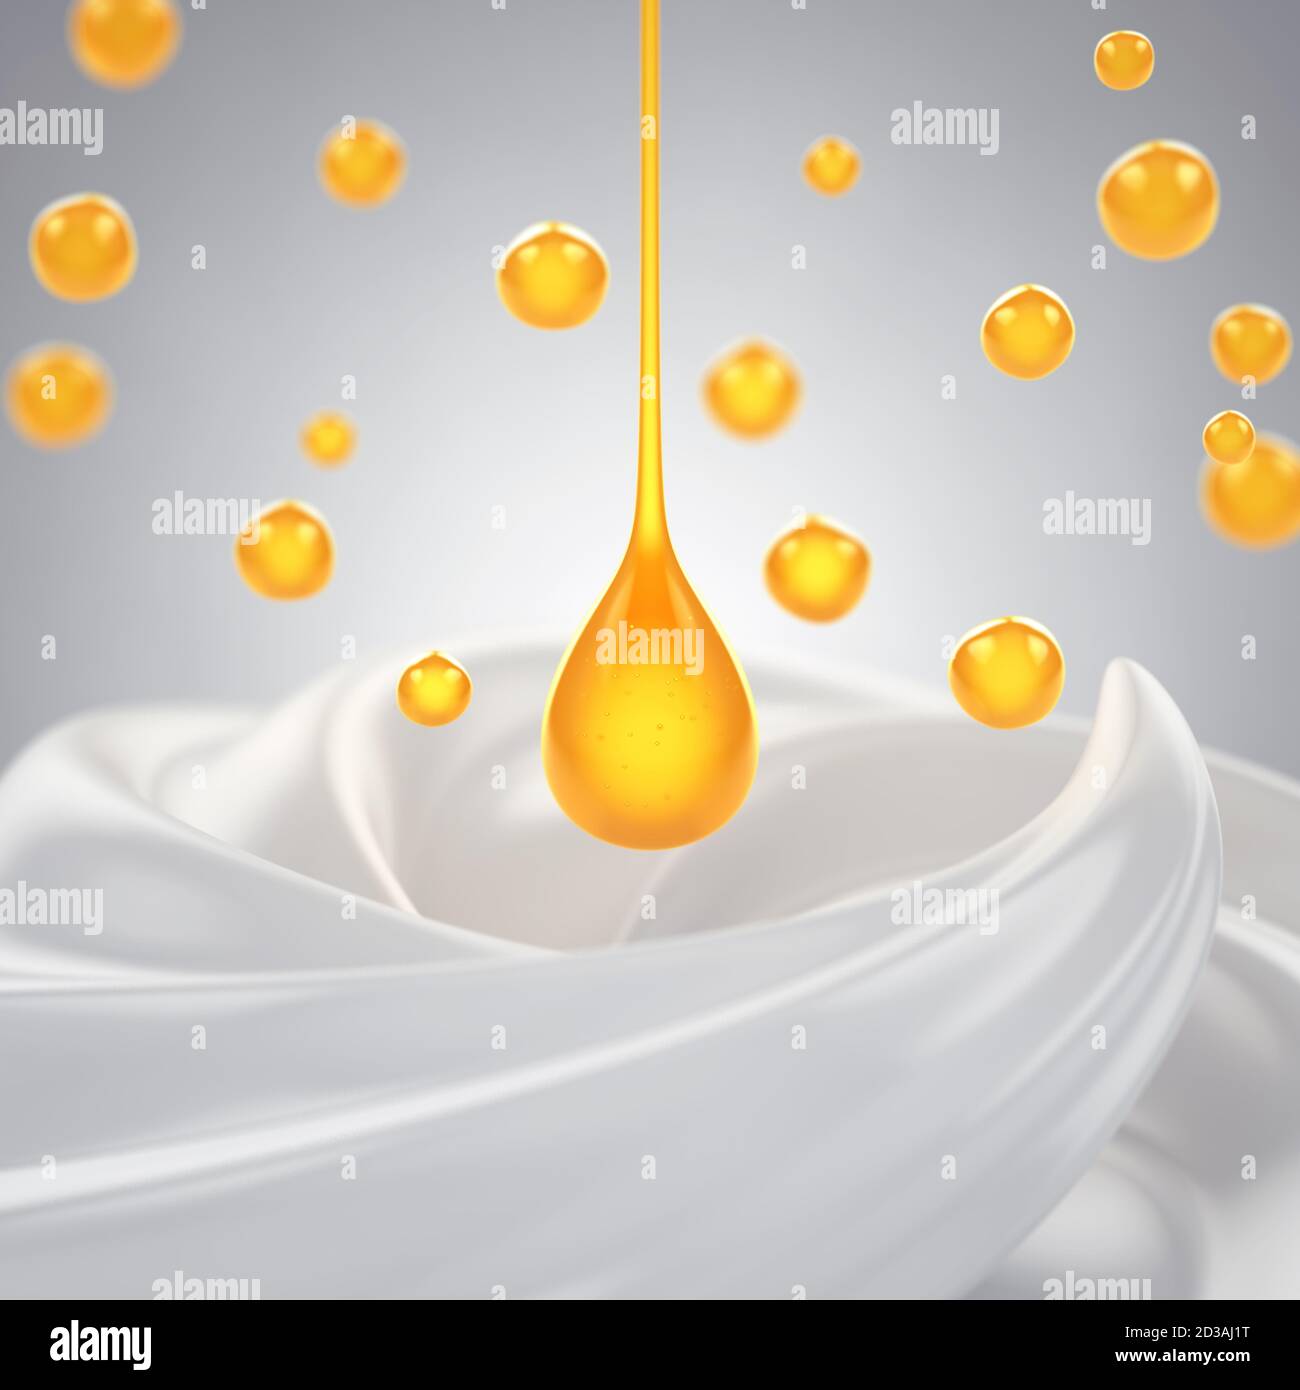 Shampoo/shower gel droplet over cream, Body care and hygiene concept Stock Photo